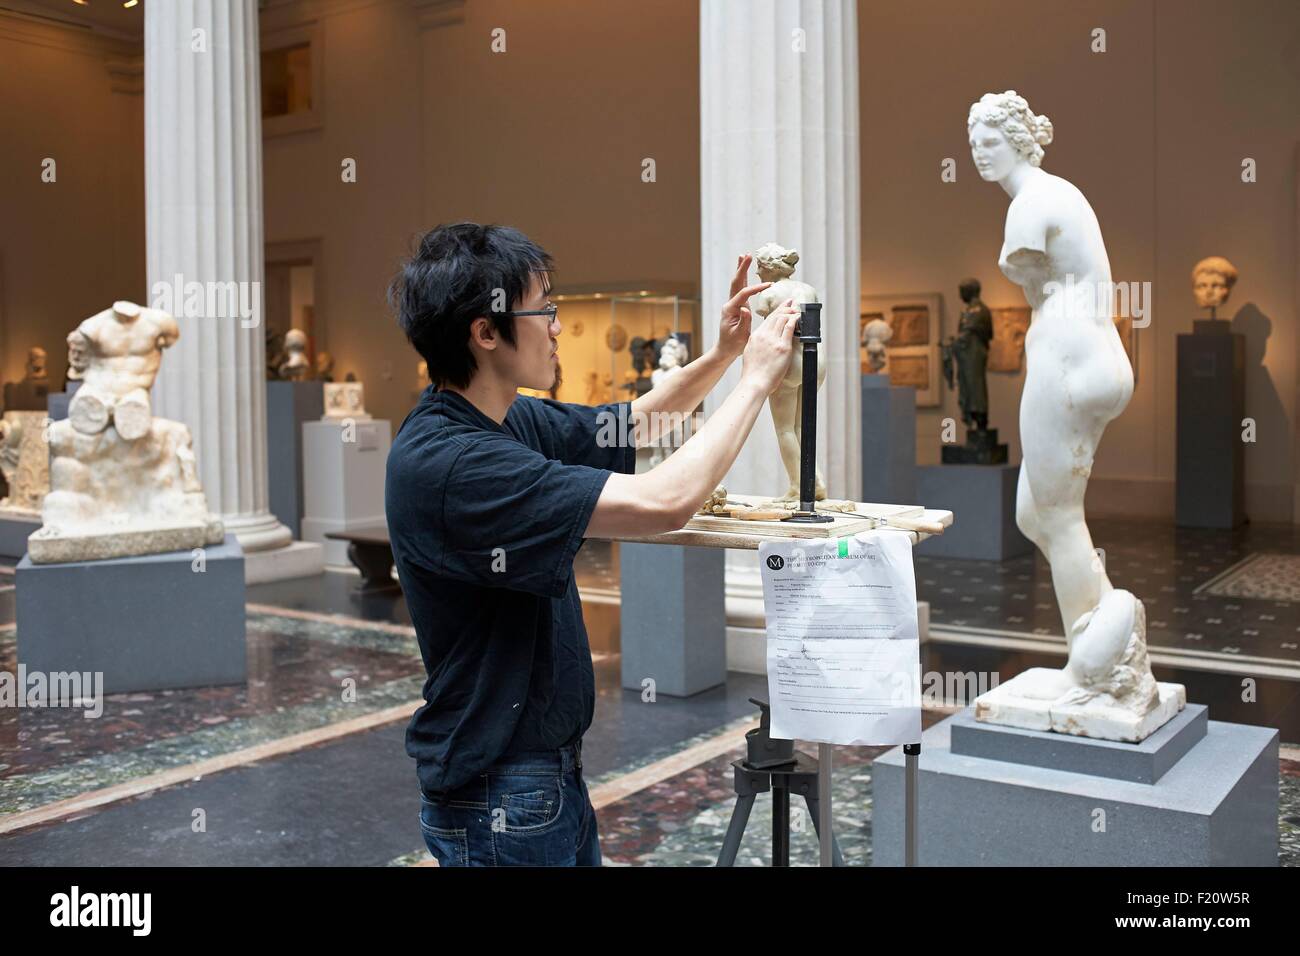 United States, New York, Manhattan, East side, Metropolitan Museum of Art (MET), Greek and Roman art gallery, Sculptor reproducing a Marble statue of Aphrodite Stock Photo